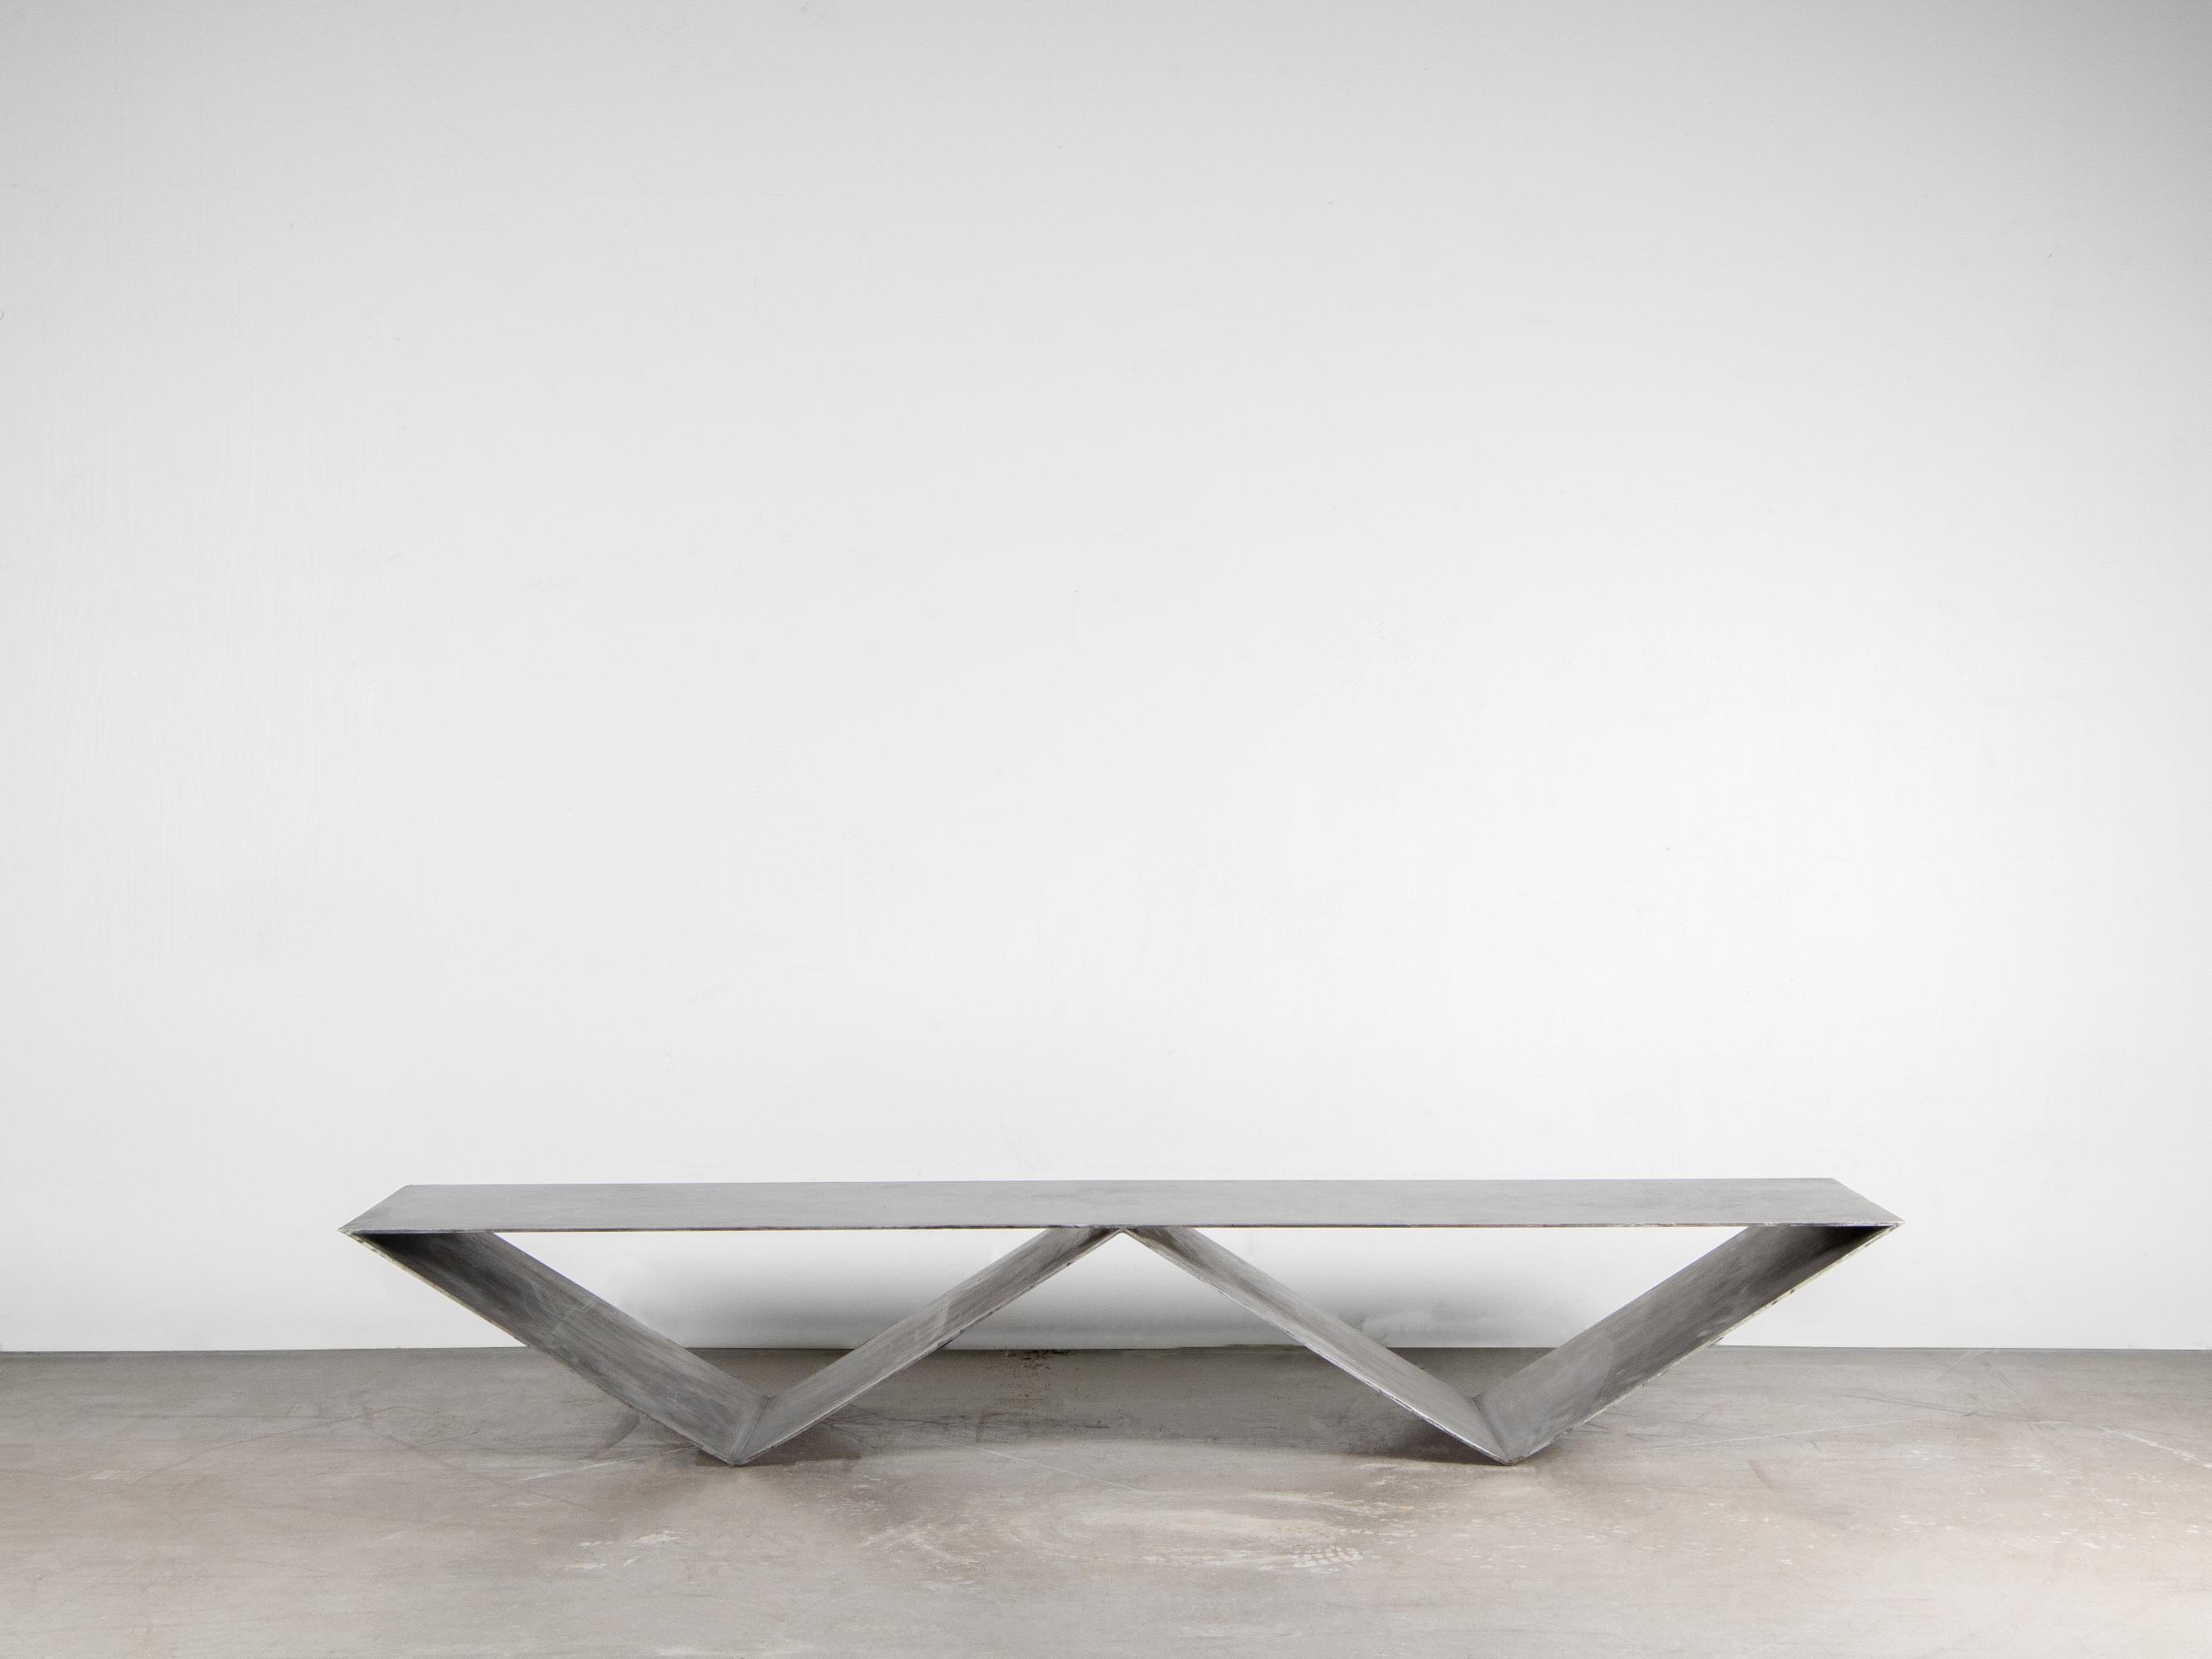 UDD sofa table by Lucas Tyra Morten
2019
Limited edition of 27
Dimensions: L 170, W 45, H 27 cm
Material: anodize the aluminum by hand which enabled the more organic faint pattern.

During a visit to the Jewish museum in New York City, Lucas Morten